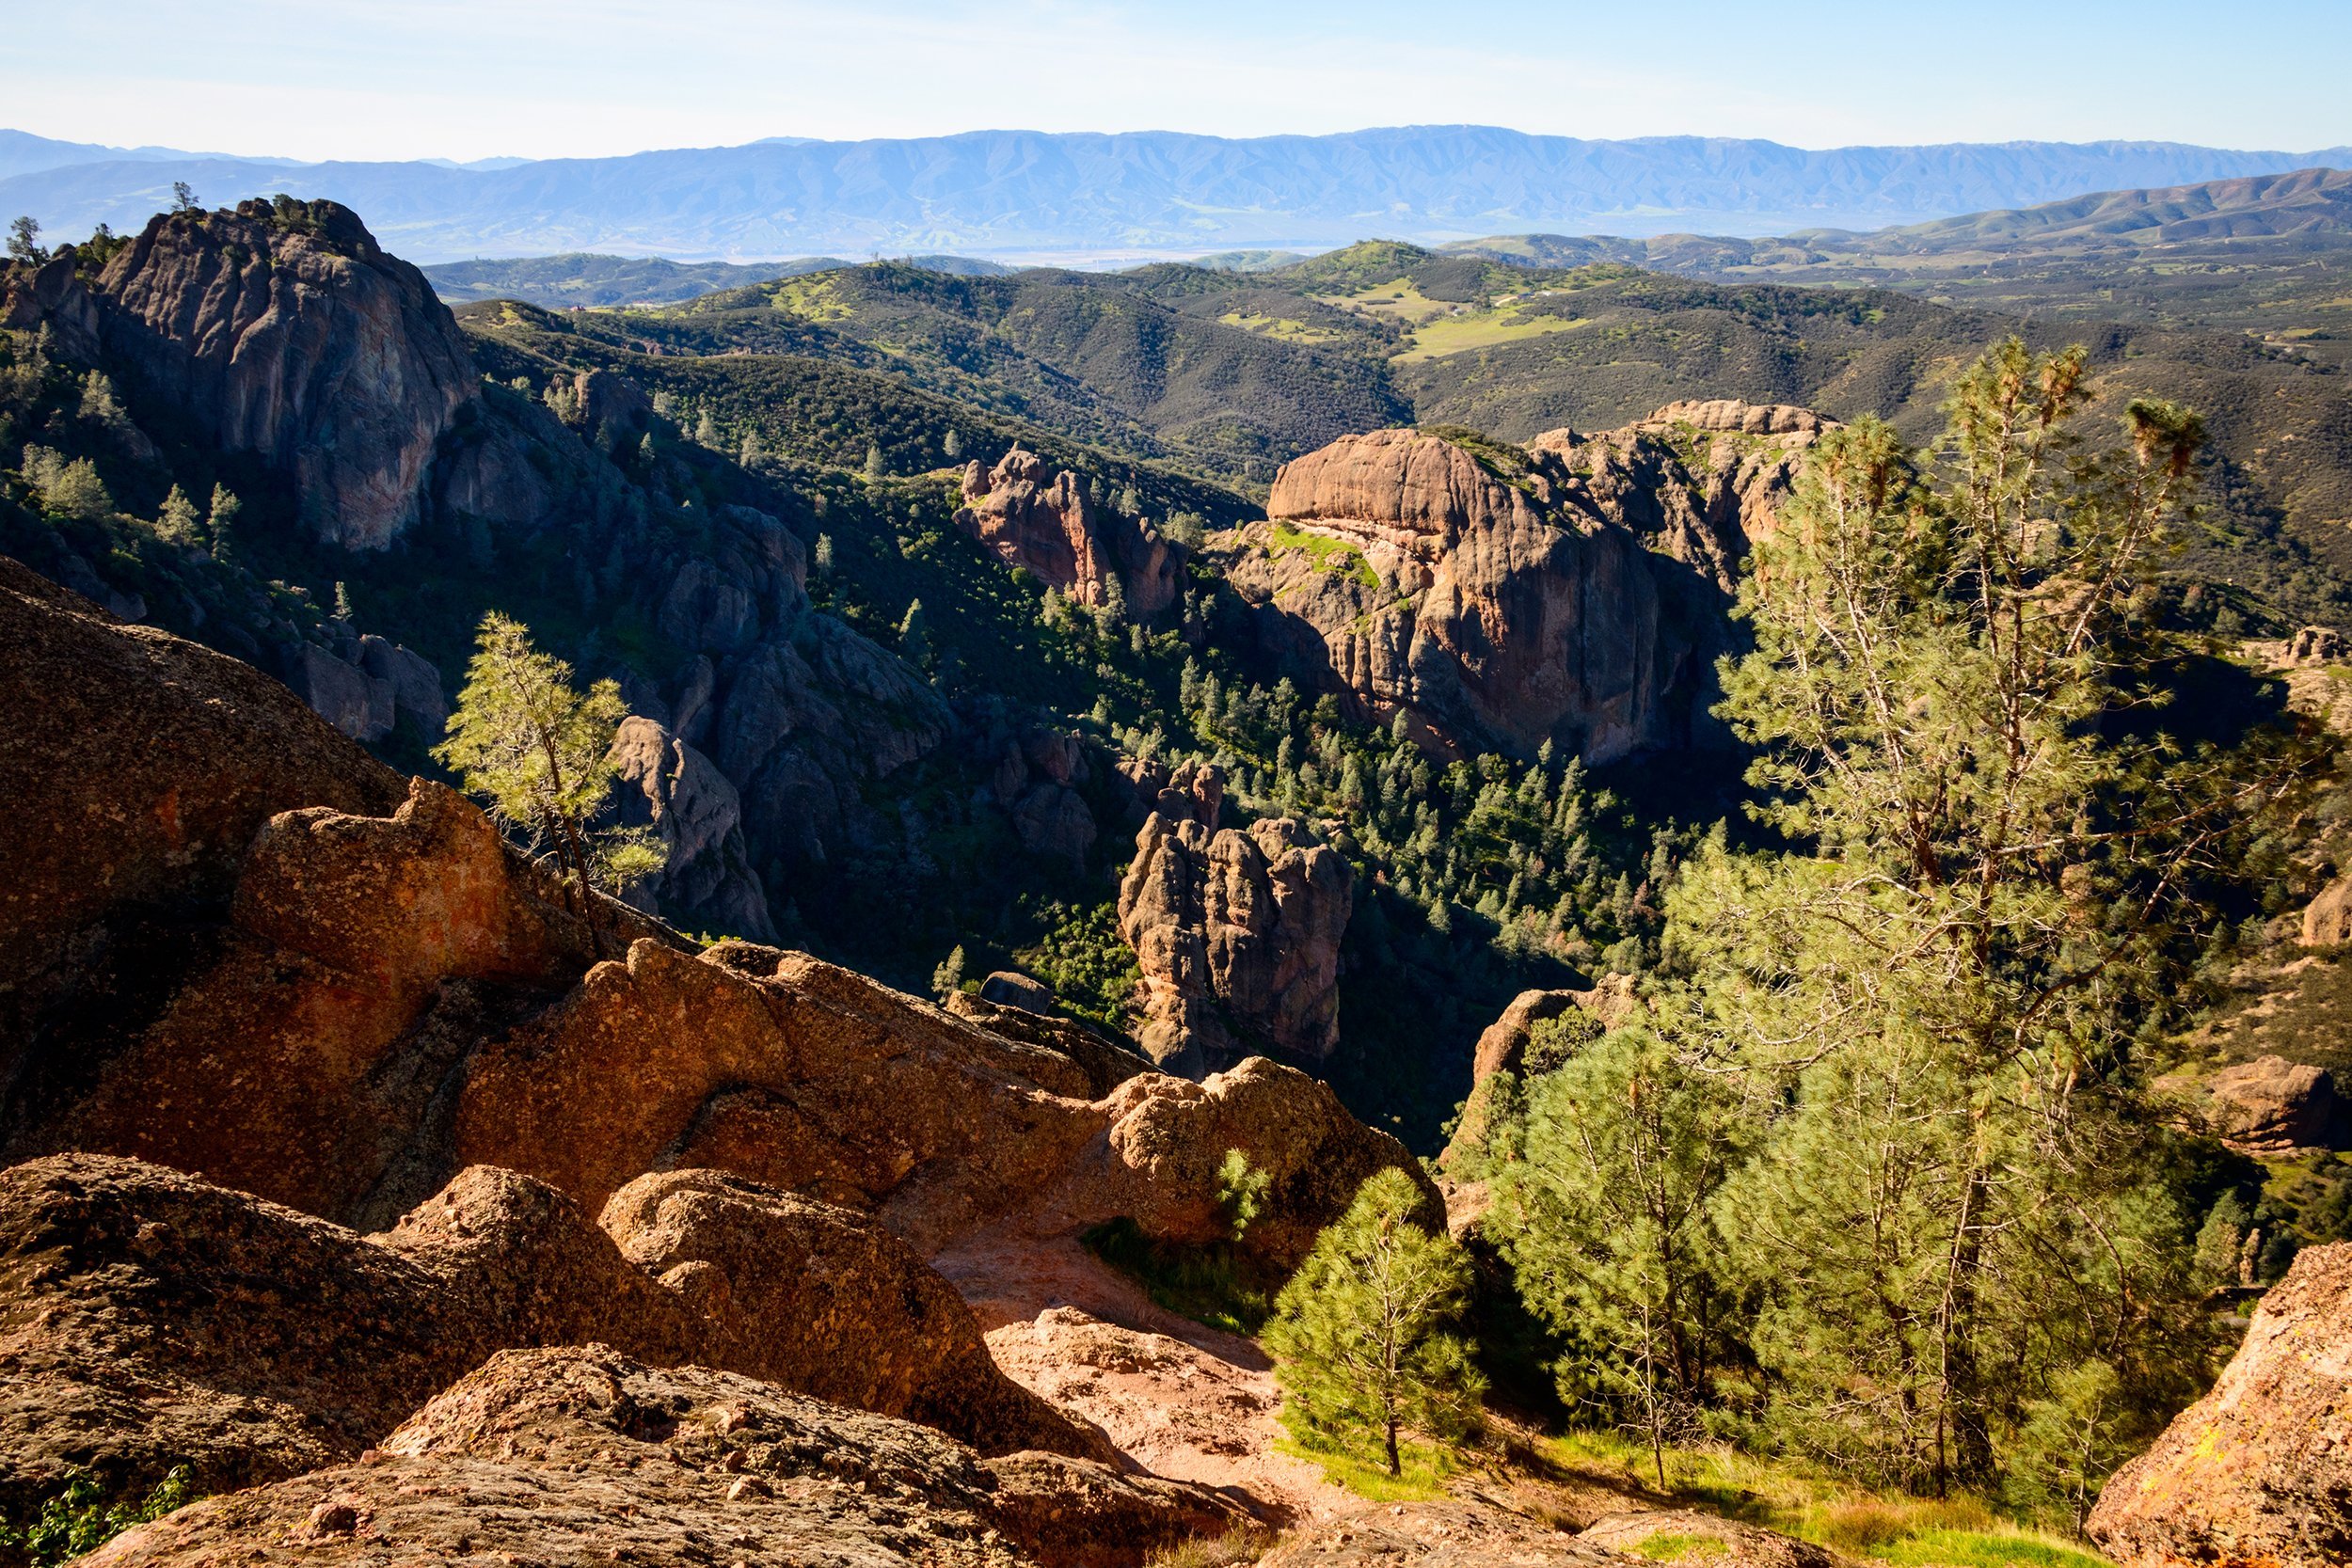 <p>California has some of the country's best-known national parks, including Yosemite and Death Valley. But take a look at the latest addition: <a href="https://www.nps.gov/pinn/index.htm">Pinnacles National Park</a>, established in 2013. Visitors can enjoy a hike through caves up to a reservoir or try to spot the rare California condor, which has a nearly 10-foot wingspan. </p><p><b>Related:</b> <a href="https://blog.cheapism.com/wild-animal-parks/">Places to Safely See Wild Animals Up Close</a></p>